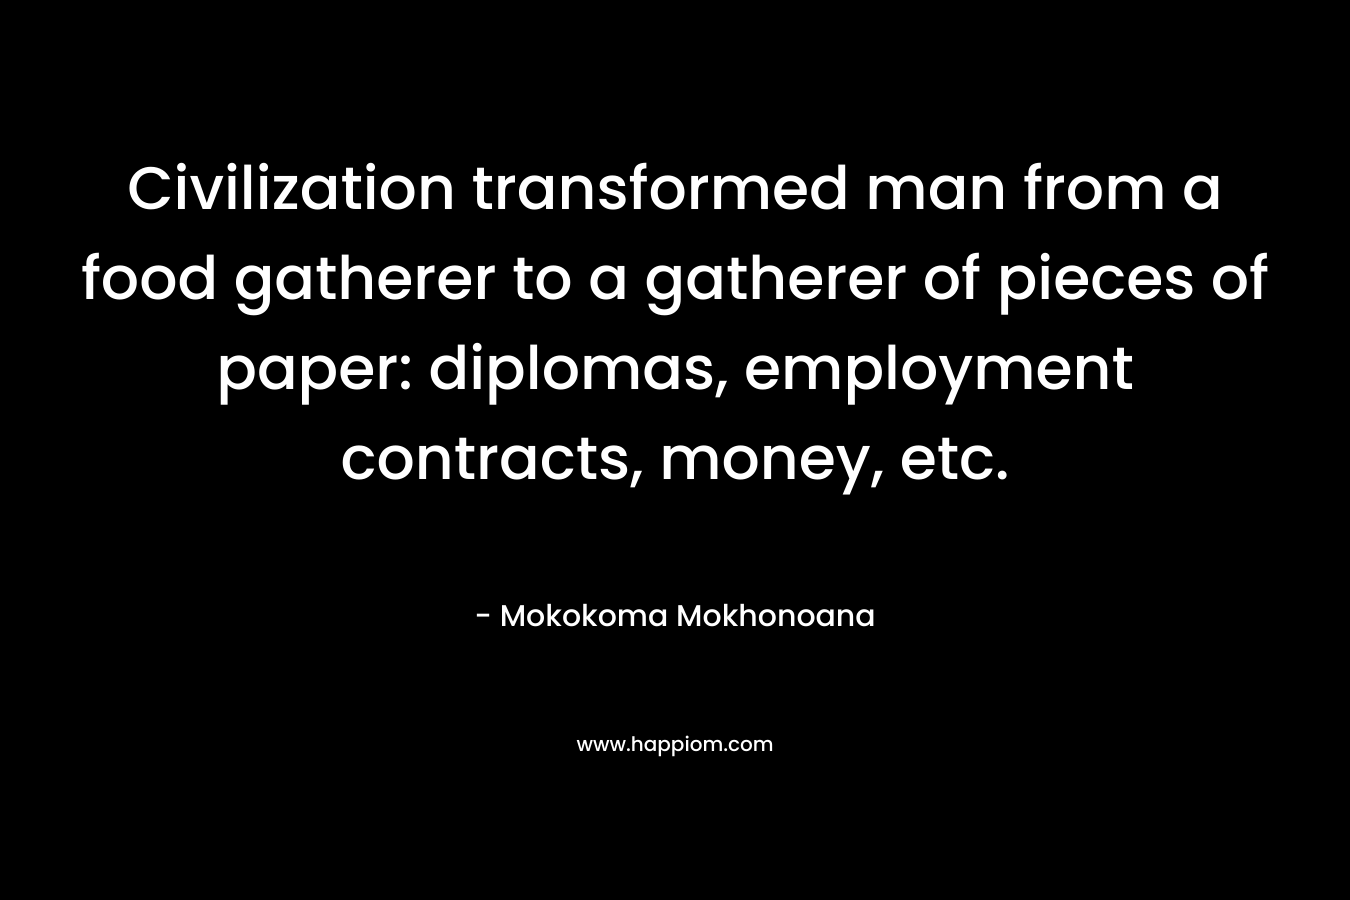 Civilization transformed man from a food gatherer to a gatherer of pieces of paper: diplomas, employment contracts, money, etc. – Mokokoma Mokhonoana